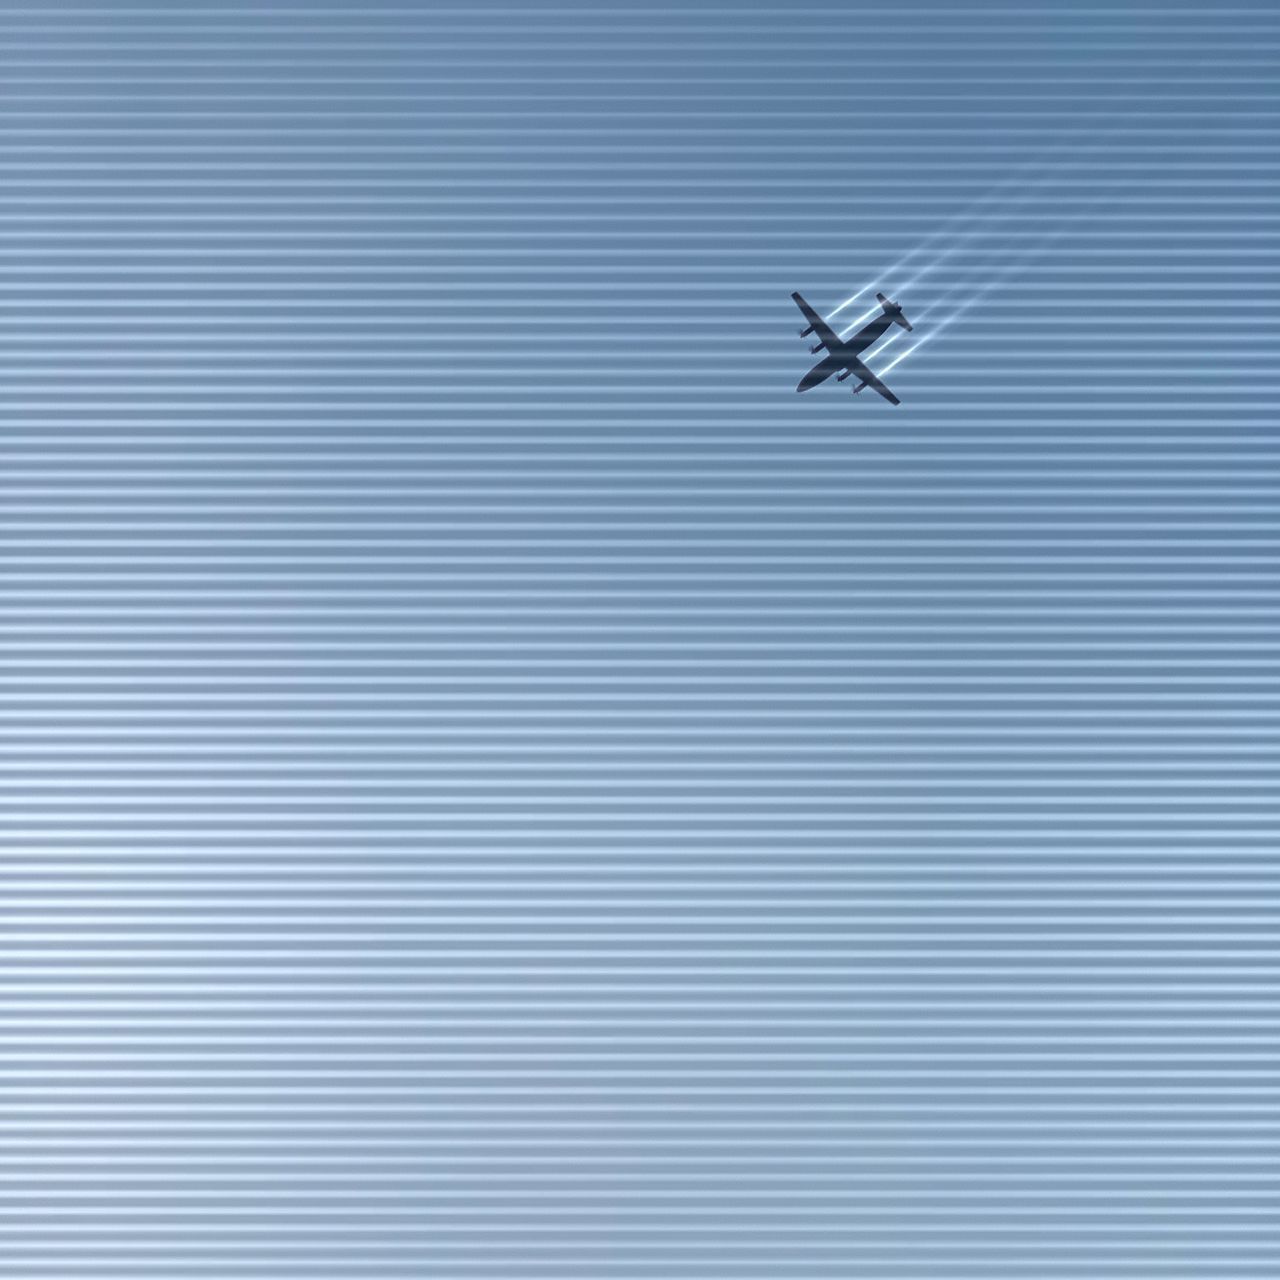 LOW ANGLE VIEW OF AIRPLANE FLYING IN BLUE SKY